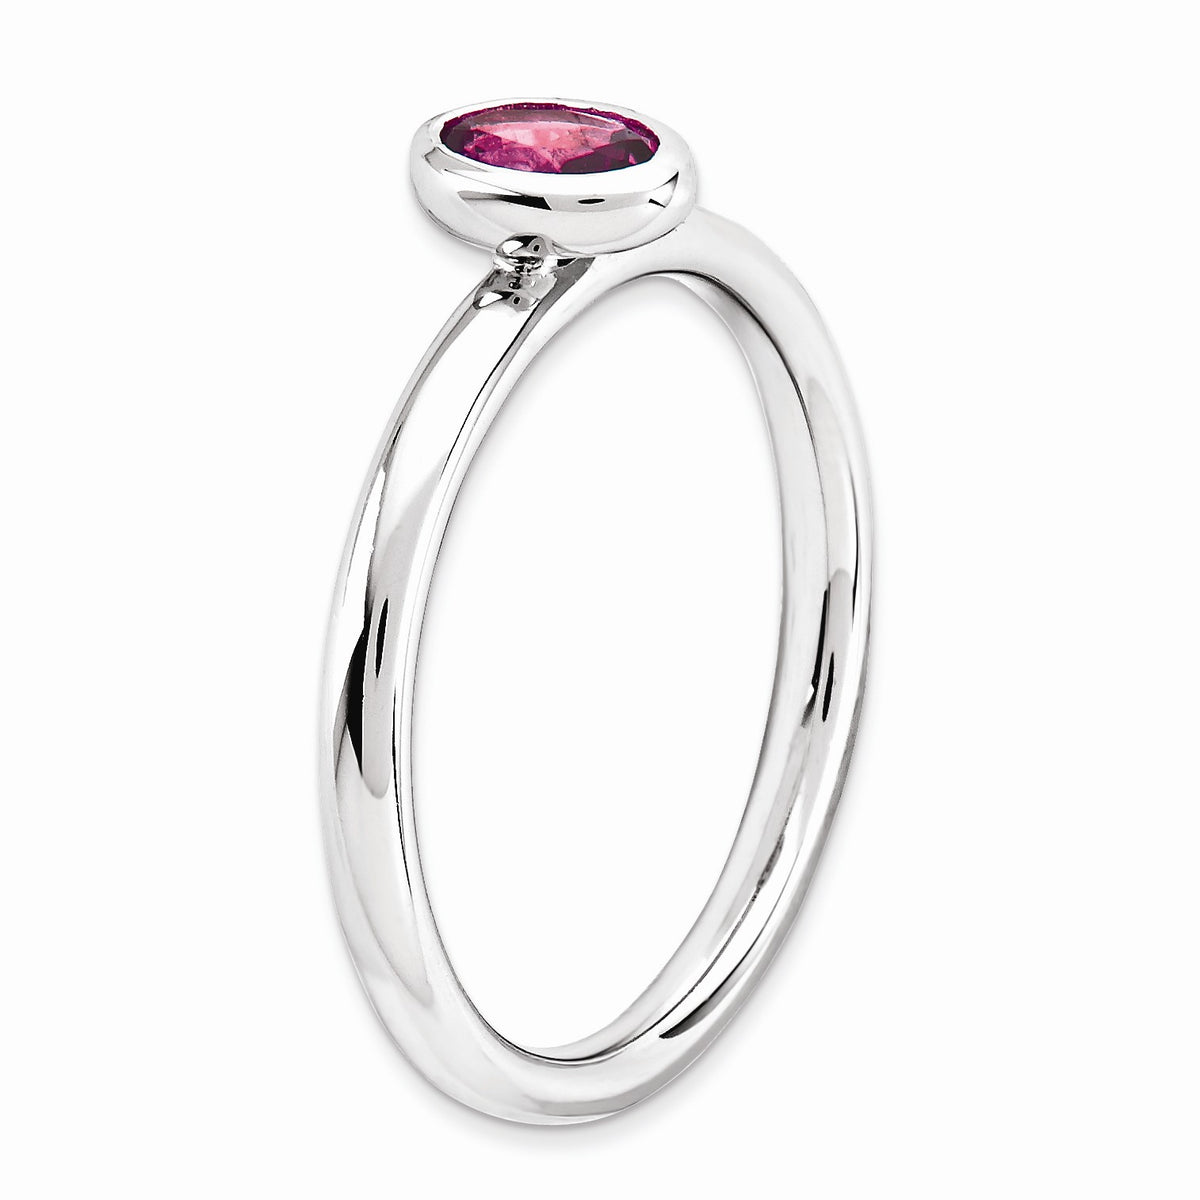 Alternate view of the Sterling Silver Stackable Oval Pink Tourmaline Solitaire Ring by The Black Bow Jewelry Co.